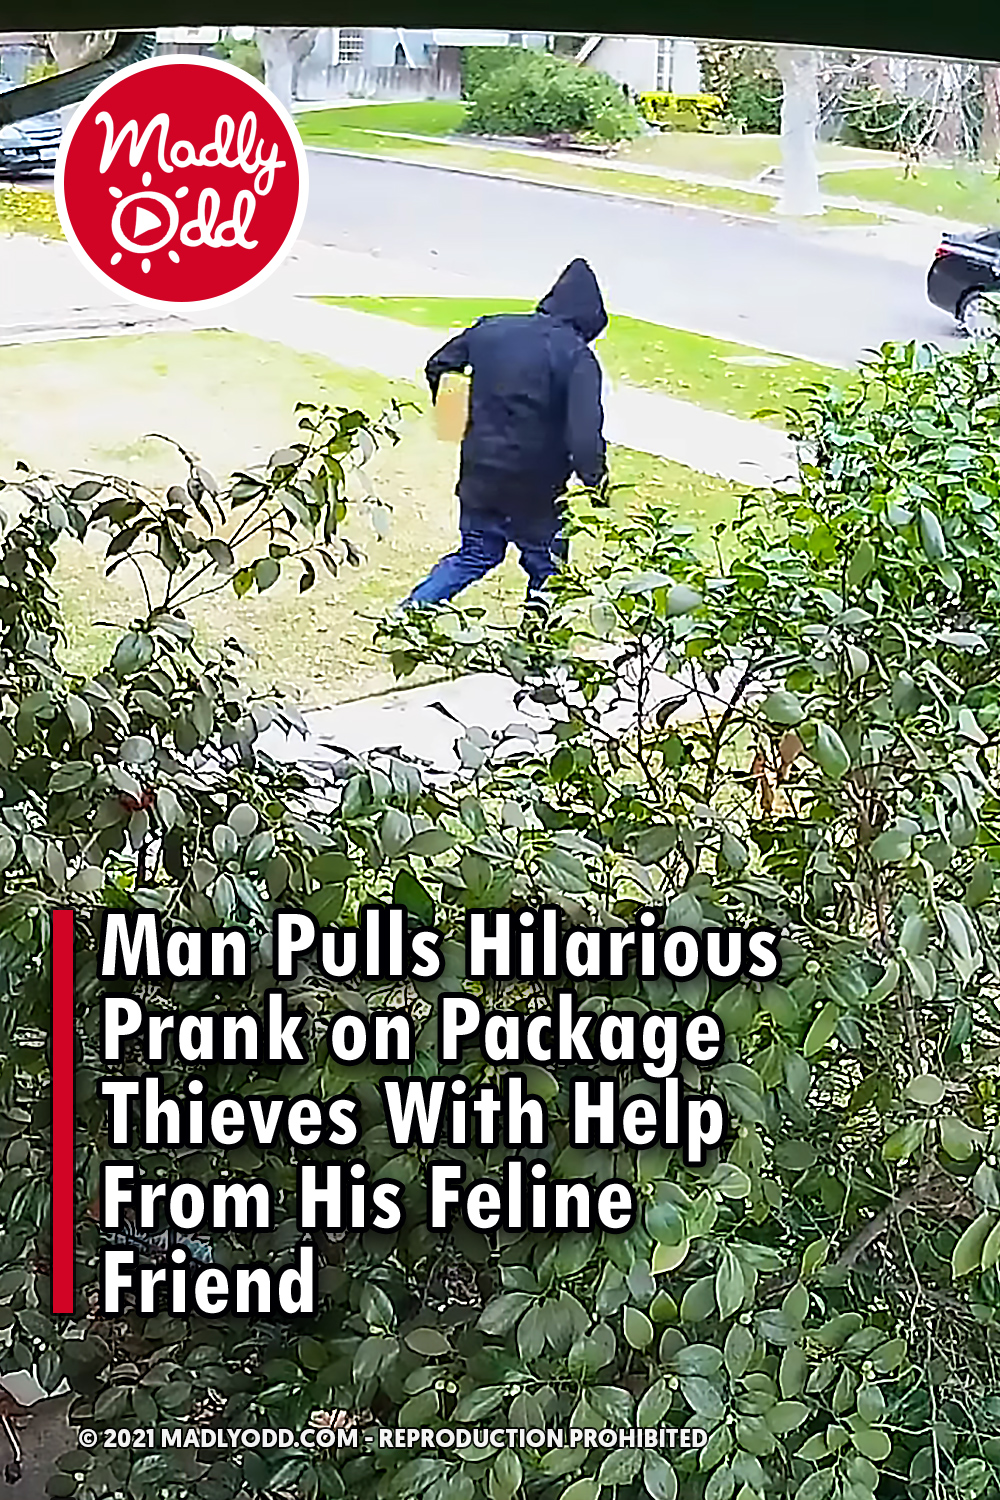 Man Pulls Hilarious Prank on Package Thieves With Help From His Feline Friend